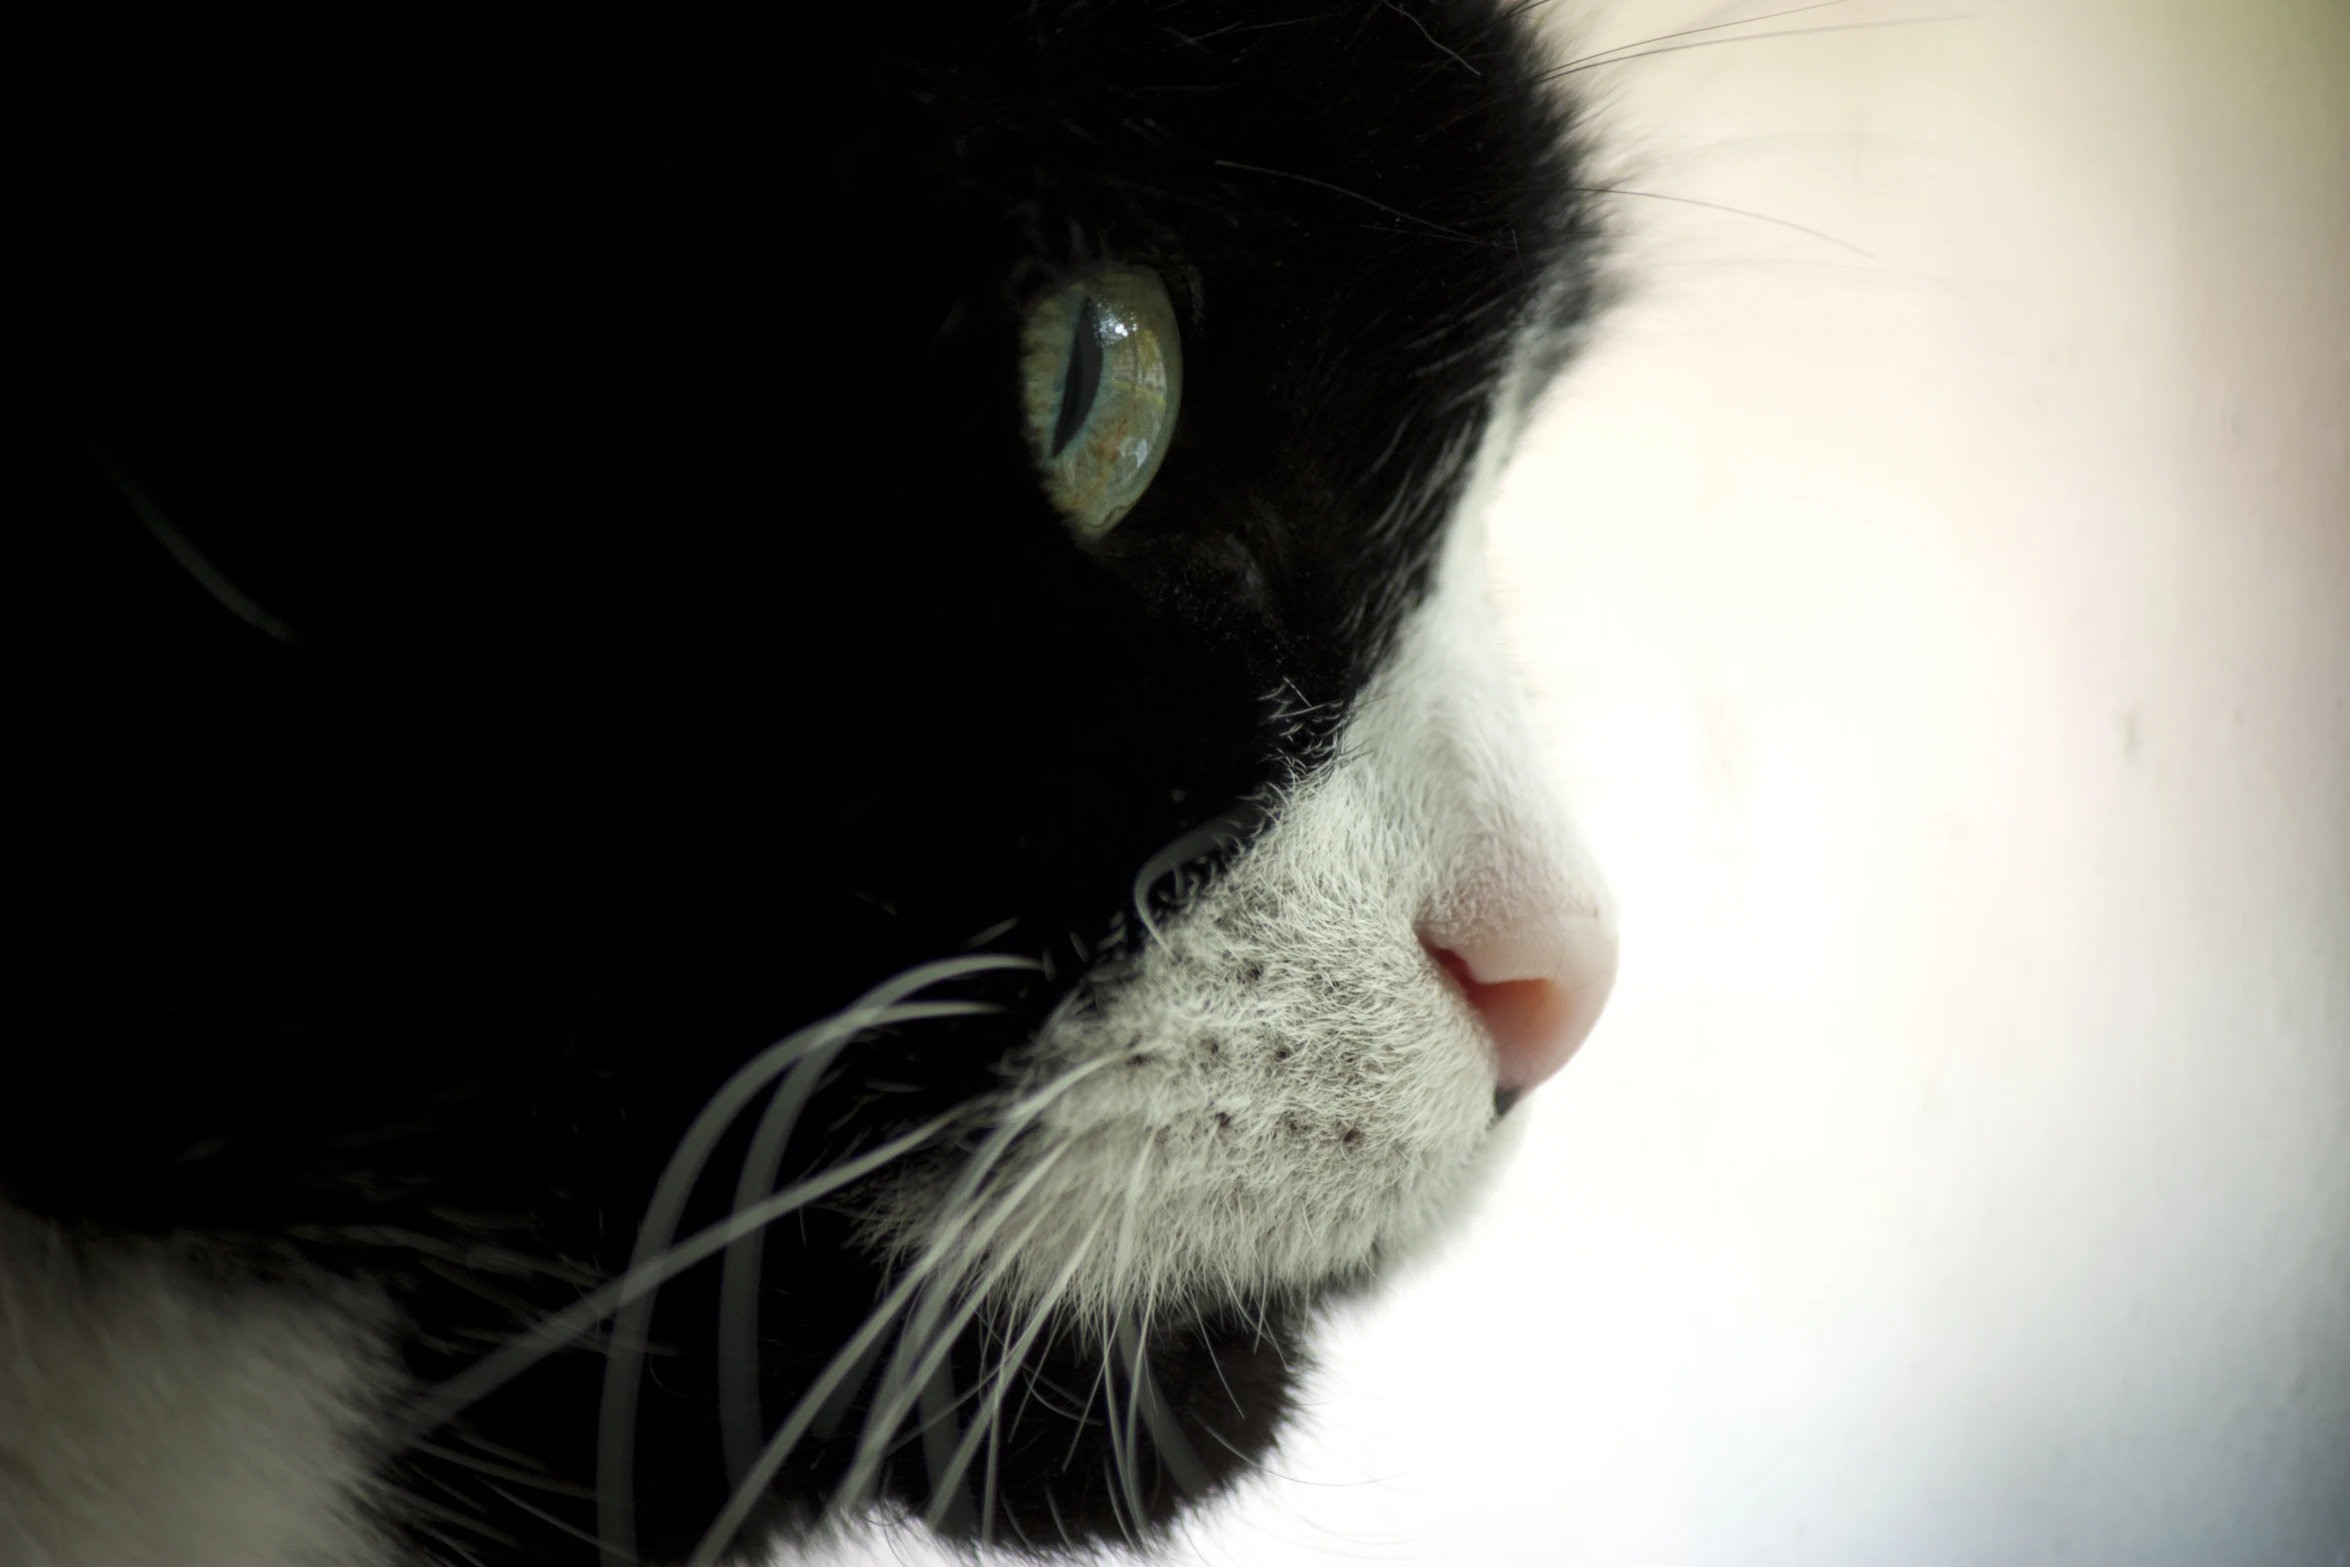 a close up view of the nose and head of a cat